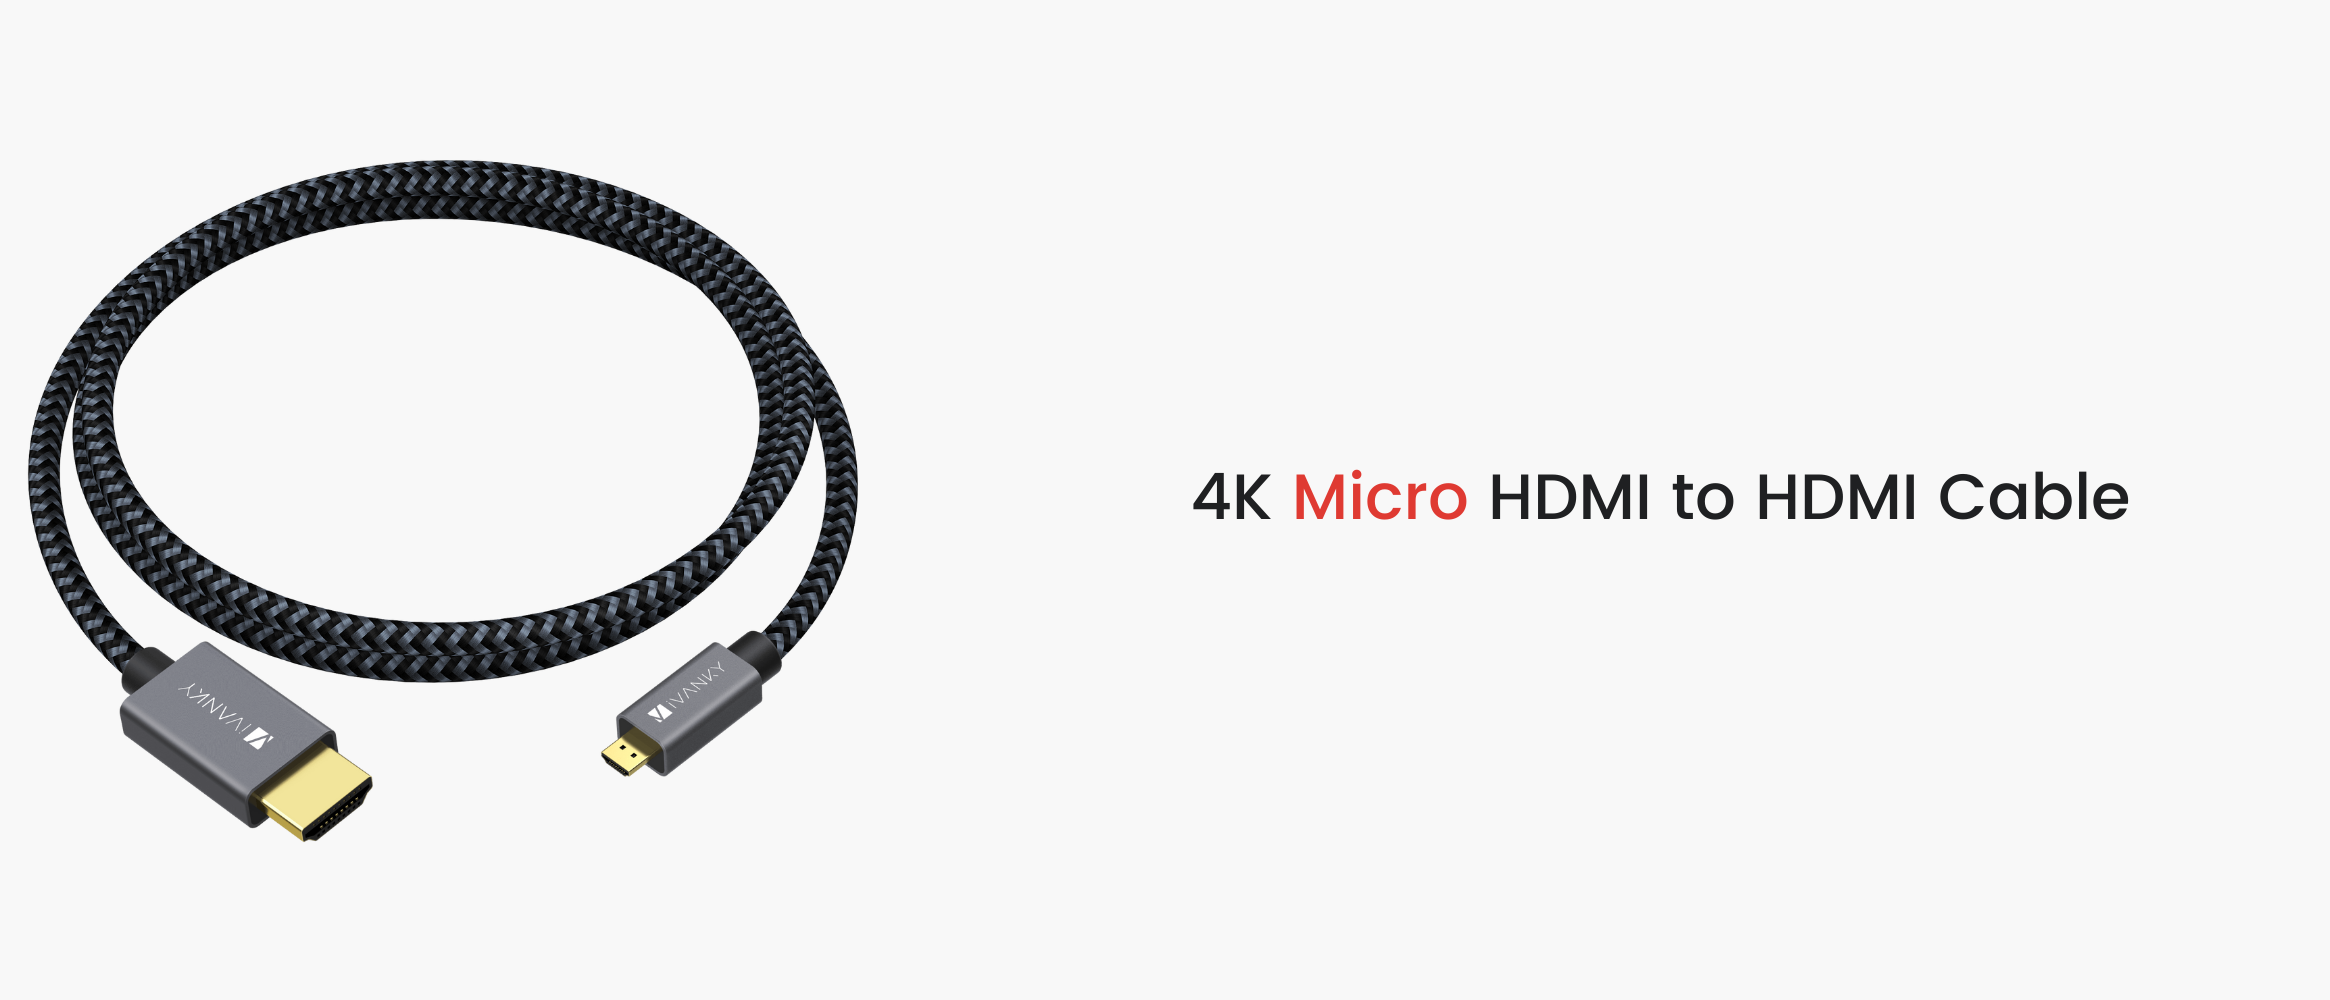 4K Micro HDMI to HDMI Cable - Braided